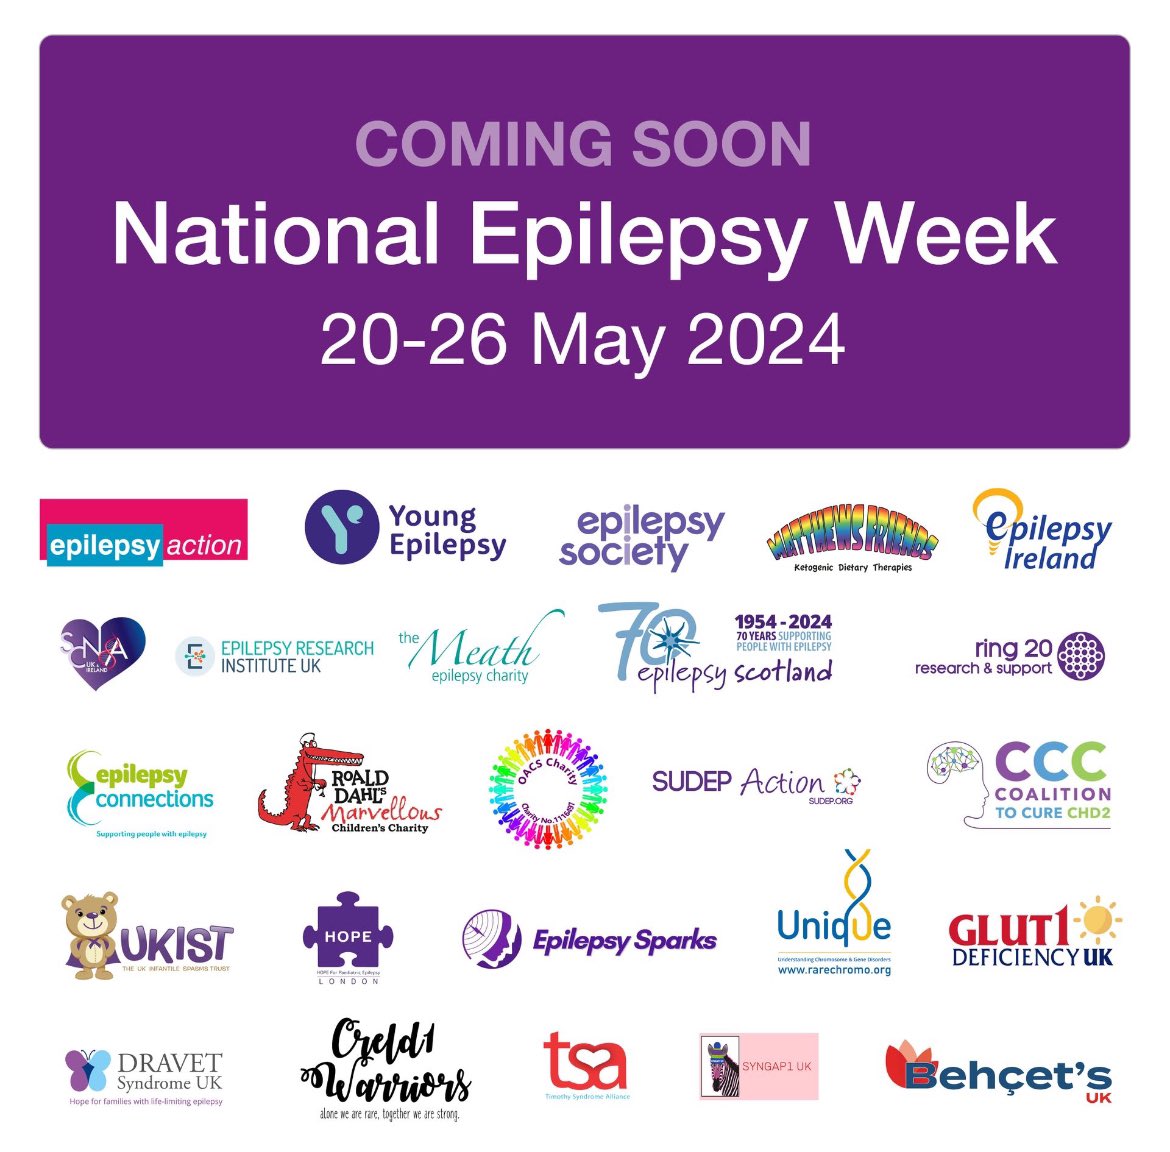 The countdown is on. Let’s raise awareness, teach about living with the condition, help people understand epilepsy & educate them about what to do when faced with a seizure. But also, have fun 💜
#NationalEpilepsyWeek 
#EpilepsyWeek #Epilepsy #EpilepsyAwareness #MoreThanSeizures